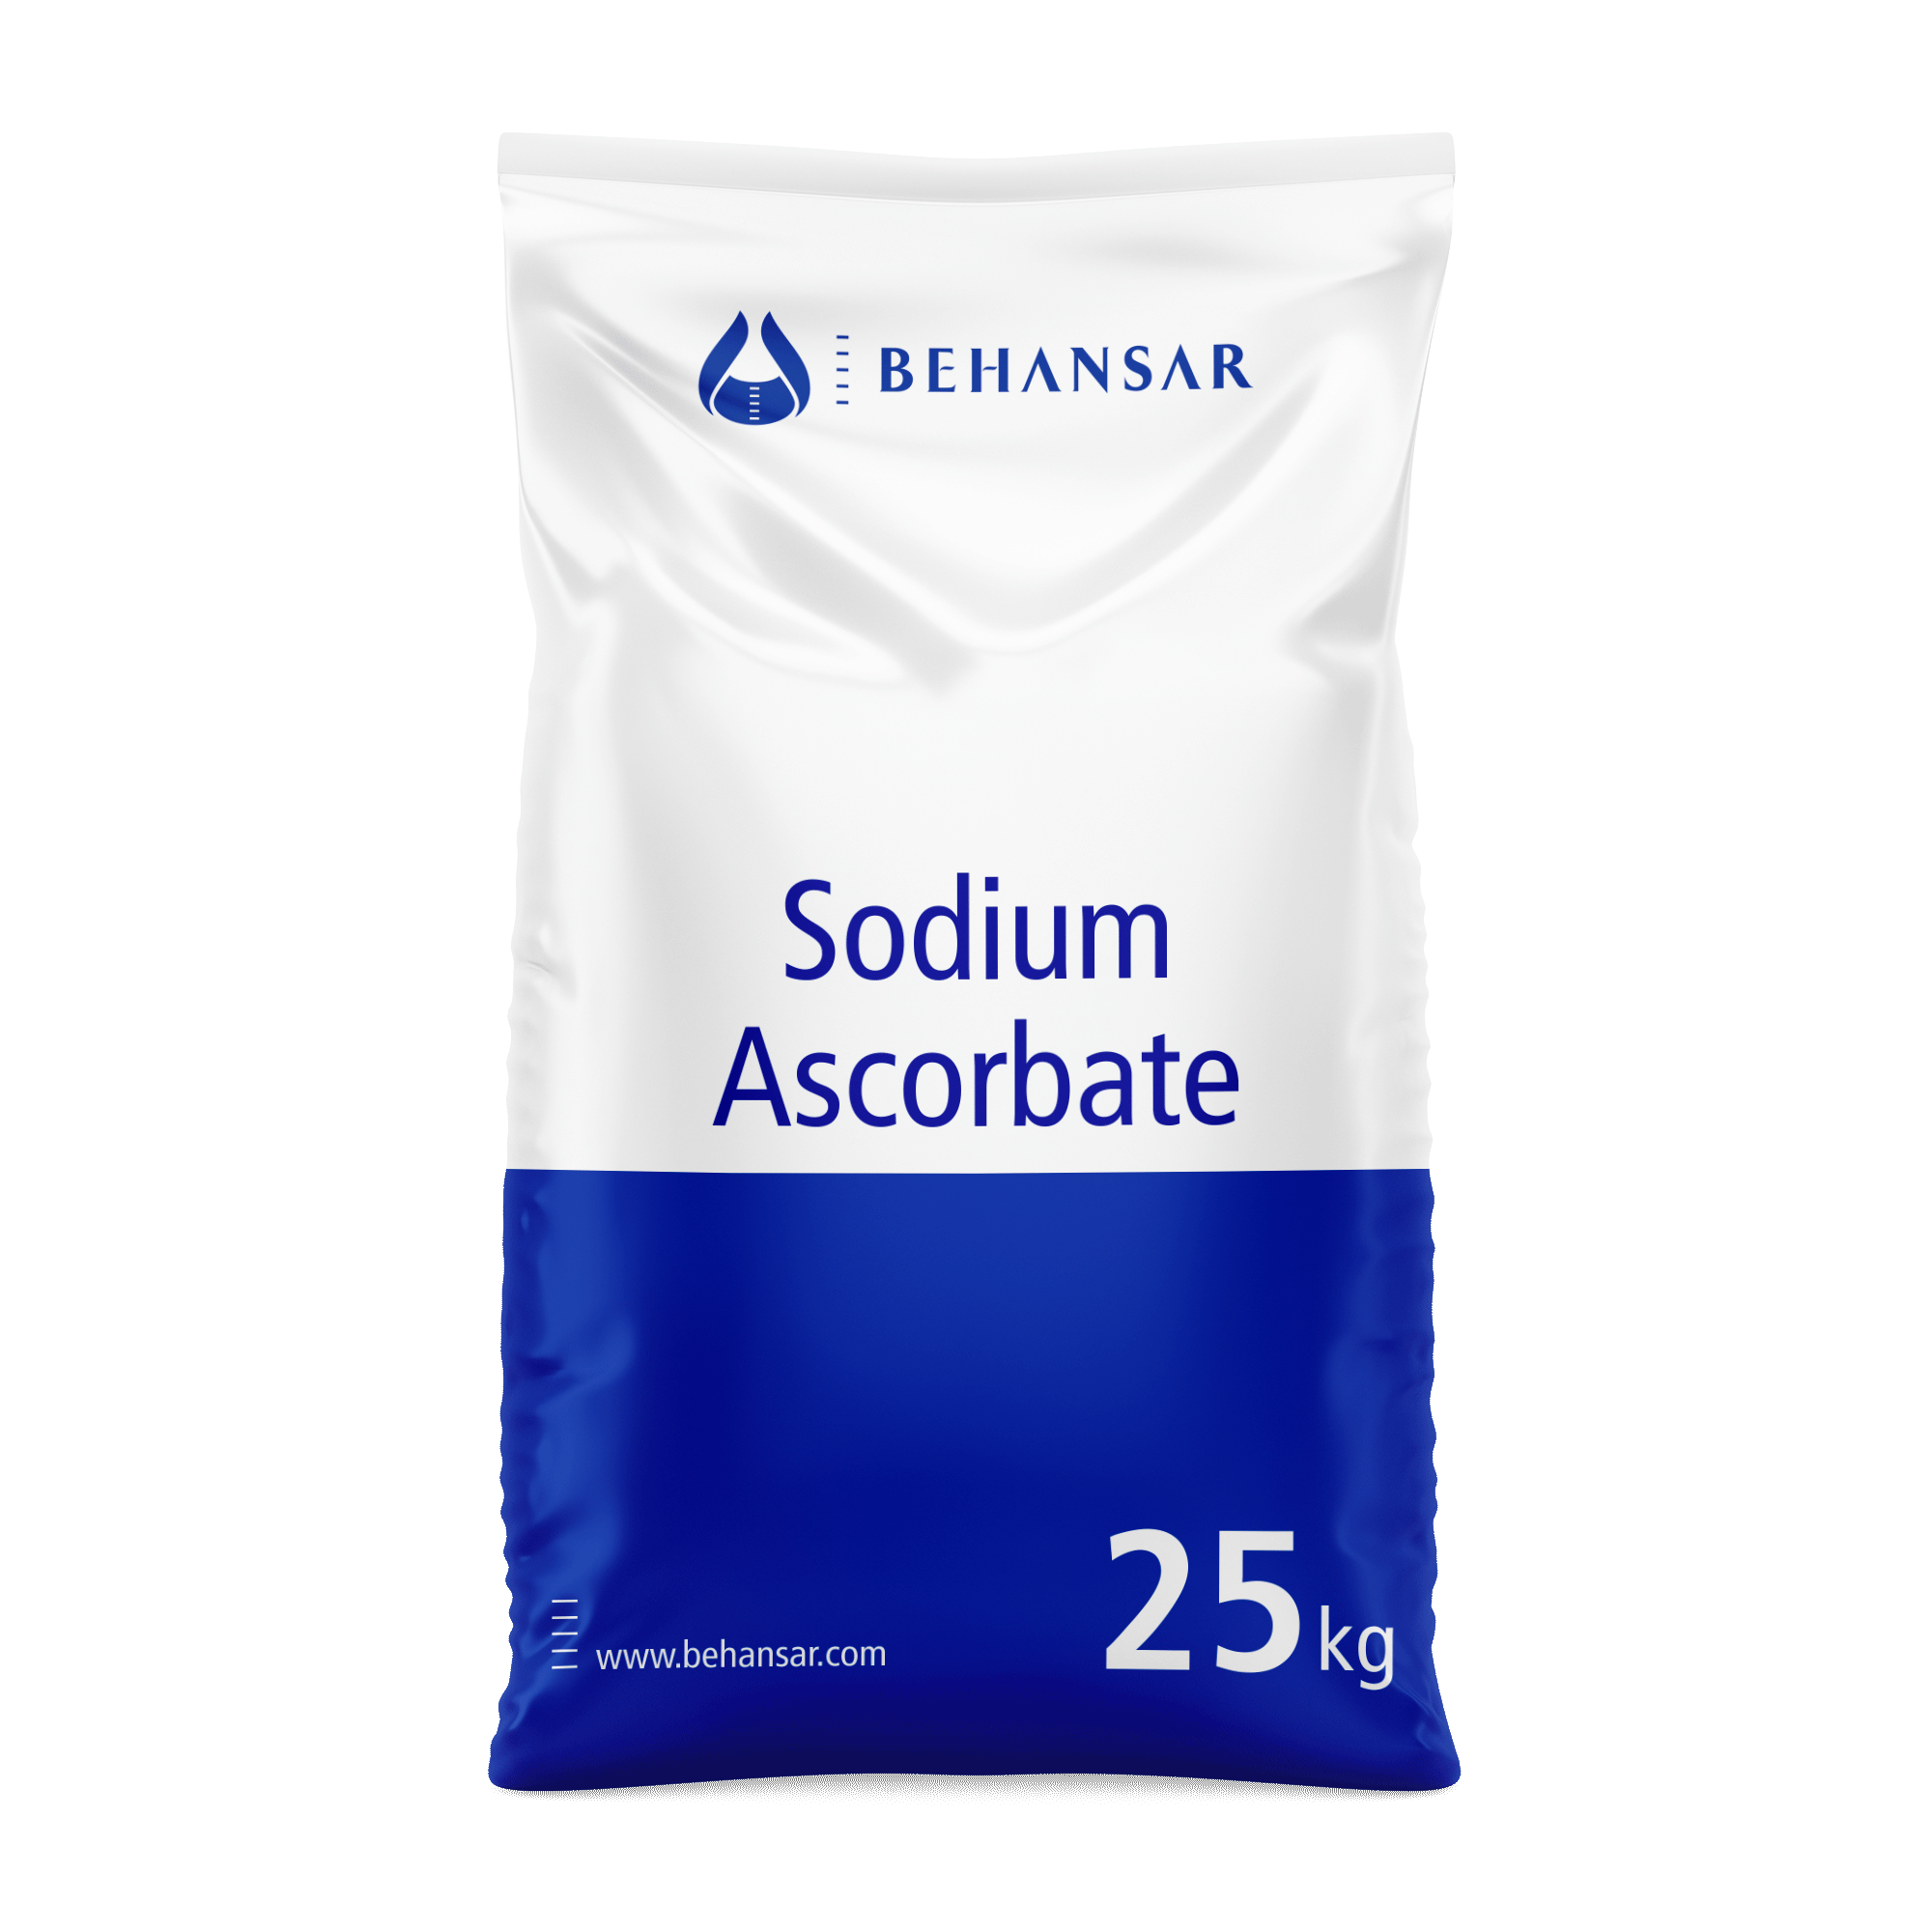 Sodium Ascorbate is one of the products of Behansar Co